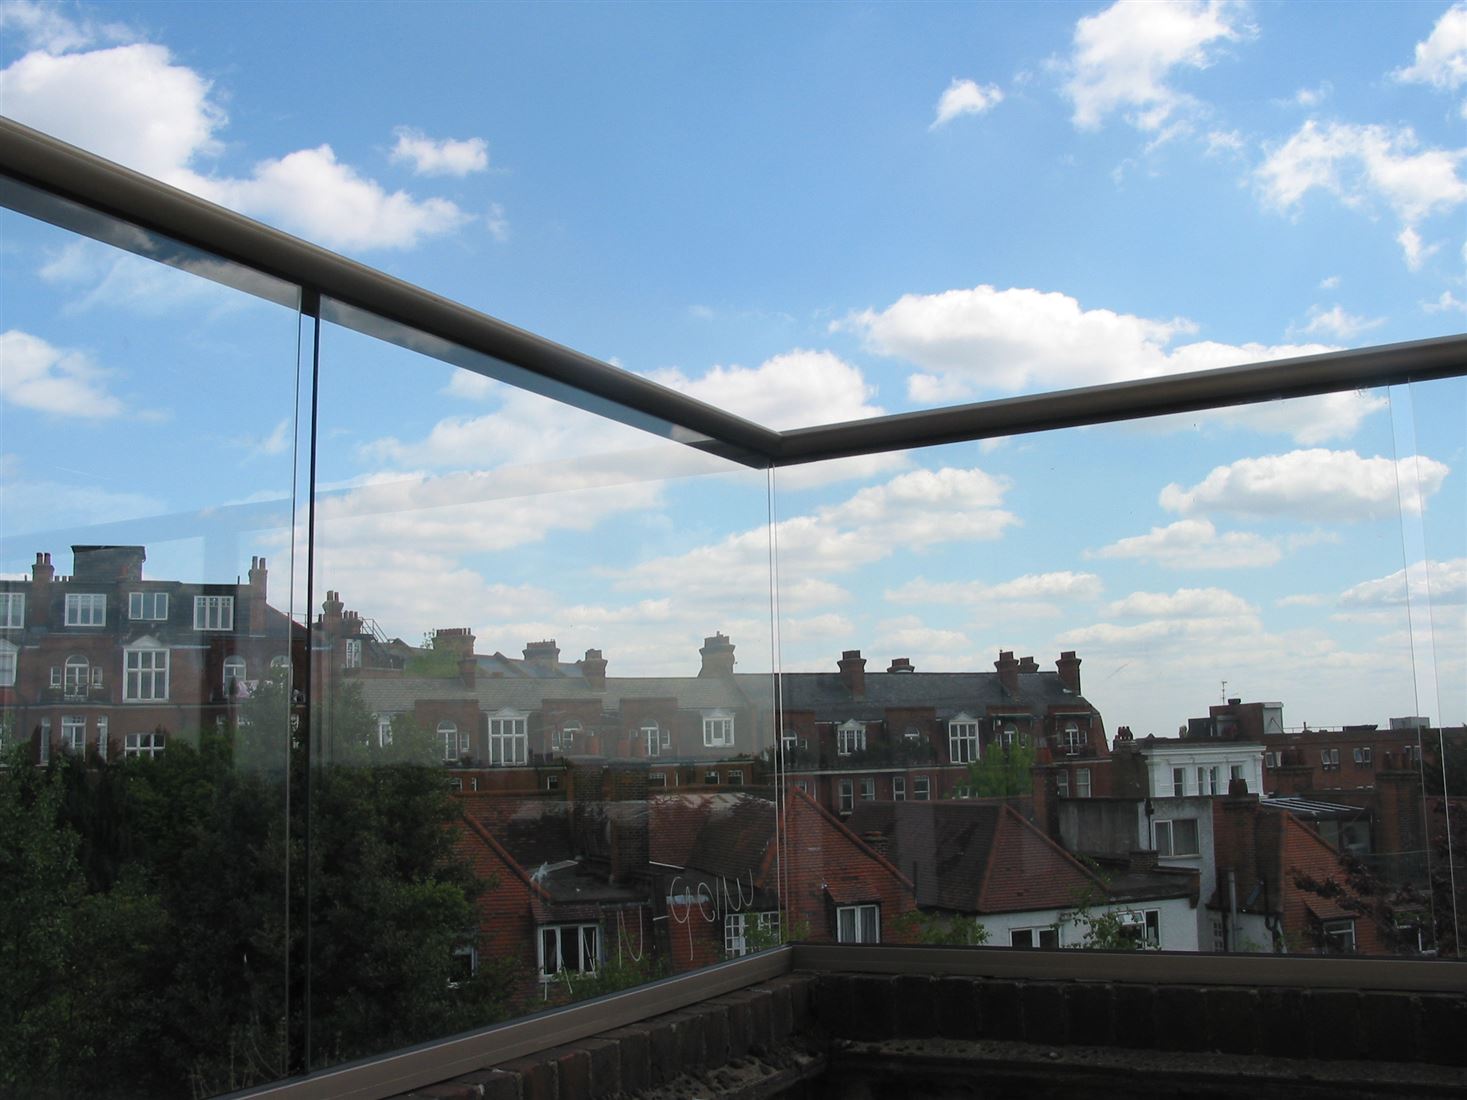 Royal Chrome Aerofoil Glass Balustrade overlooking a clear view of a town